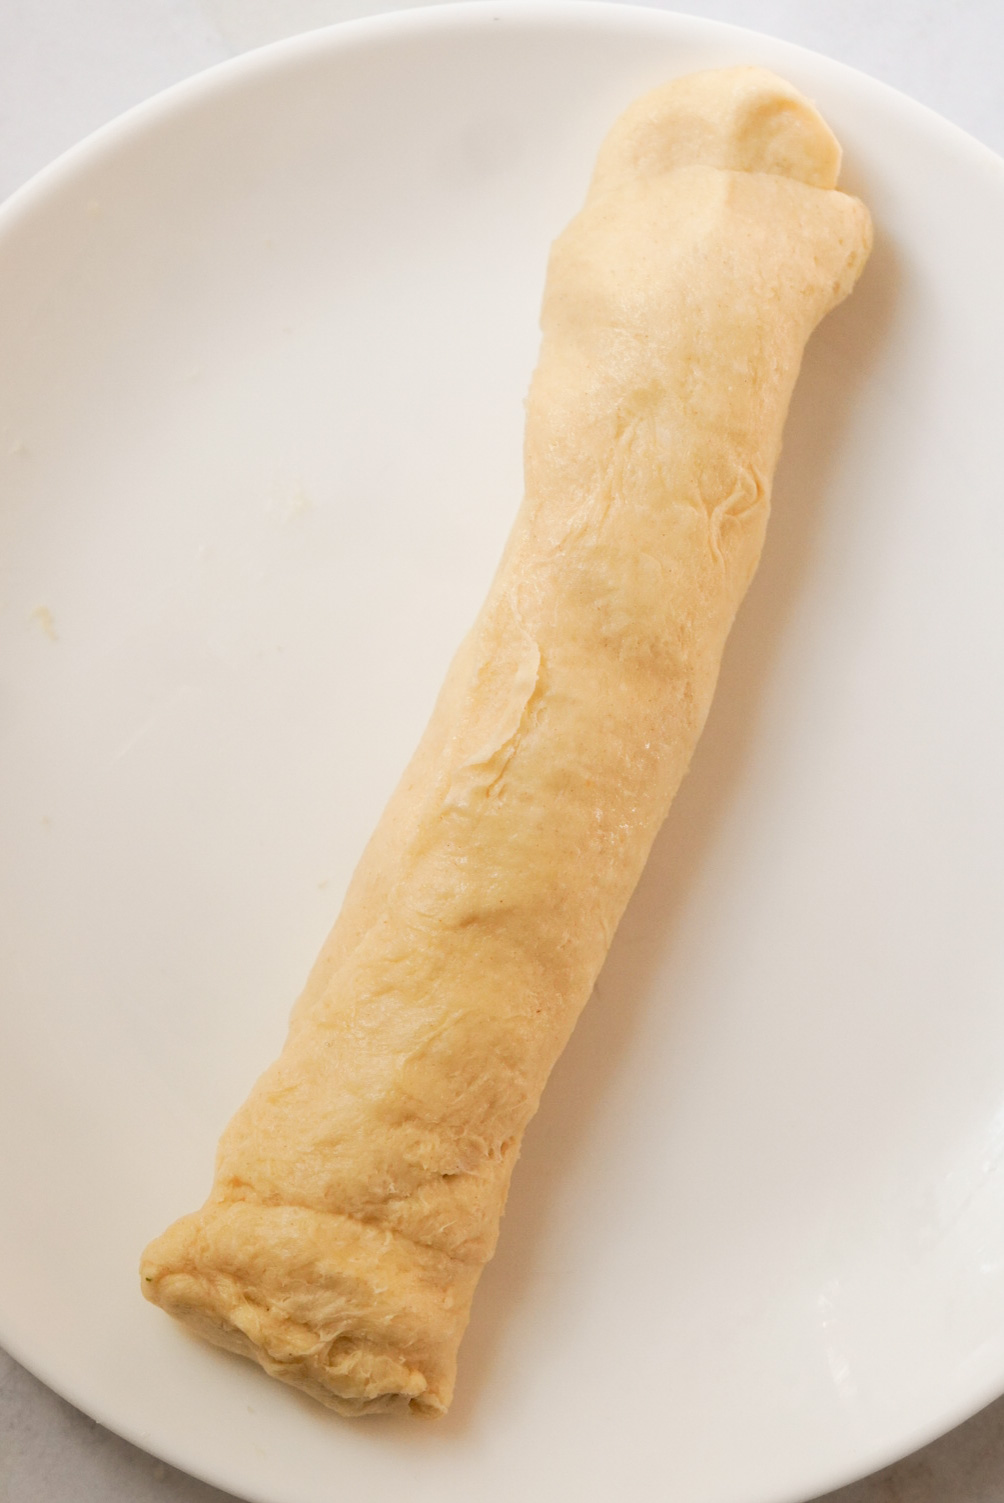 rolled up crescent dough